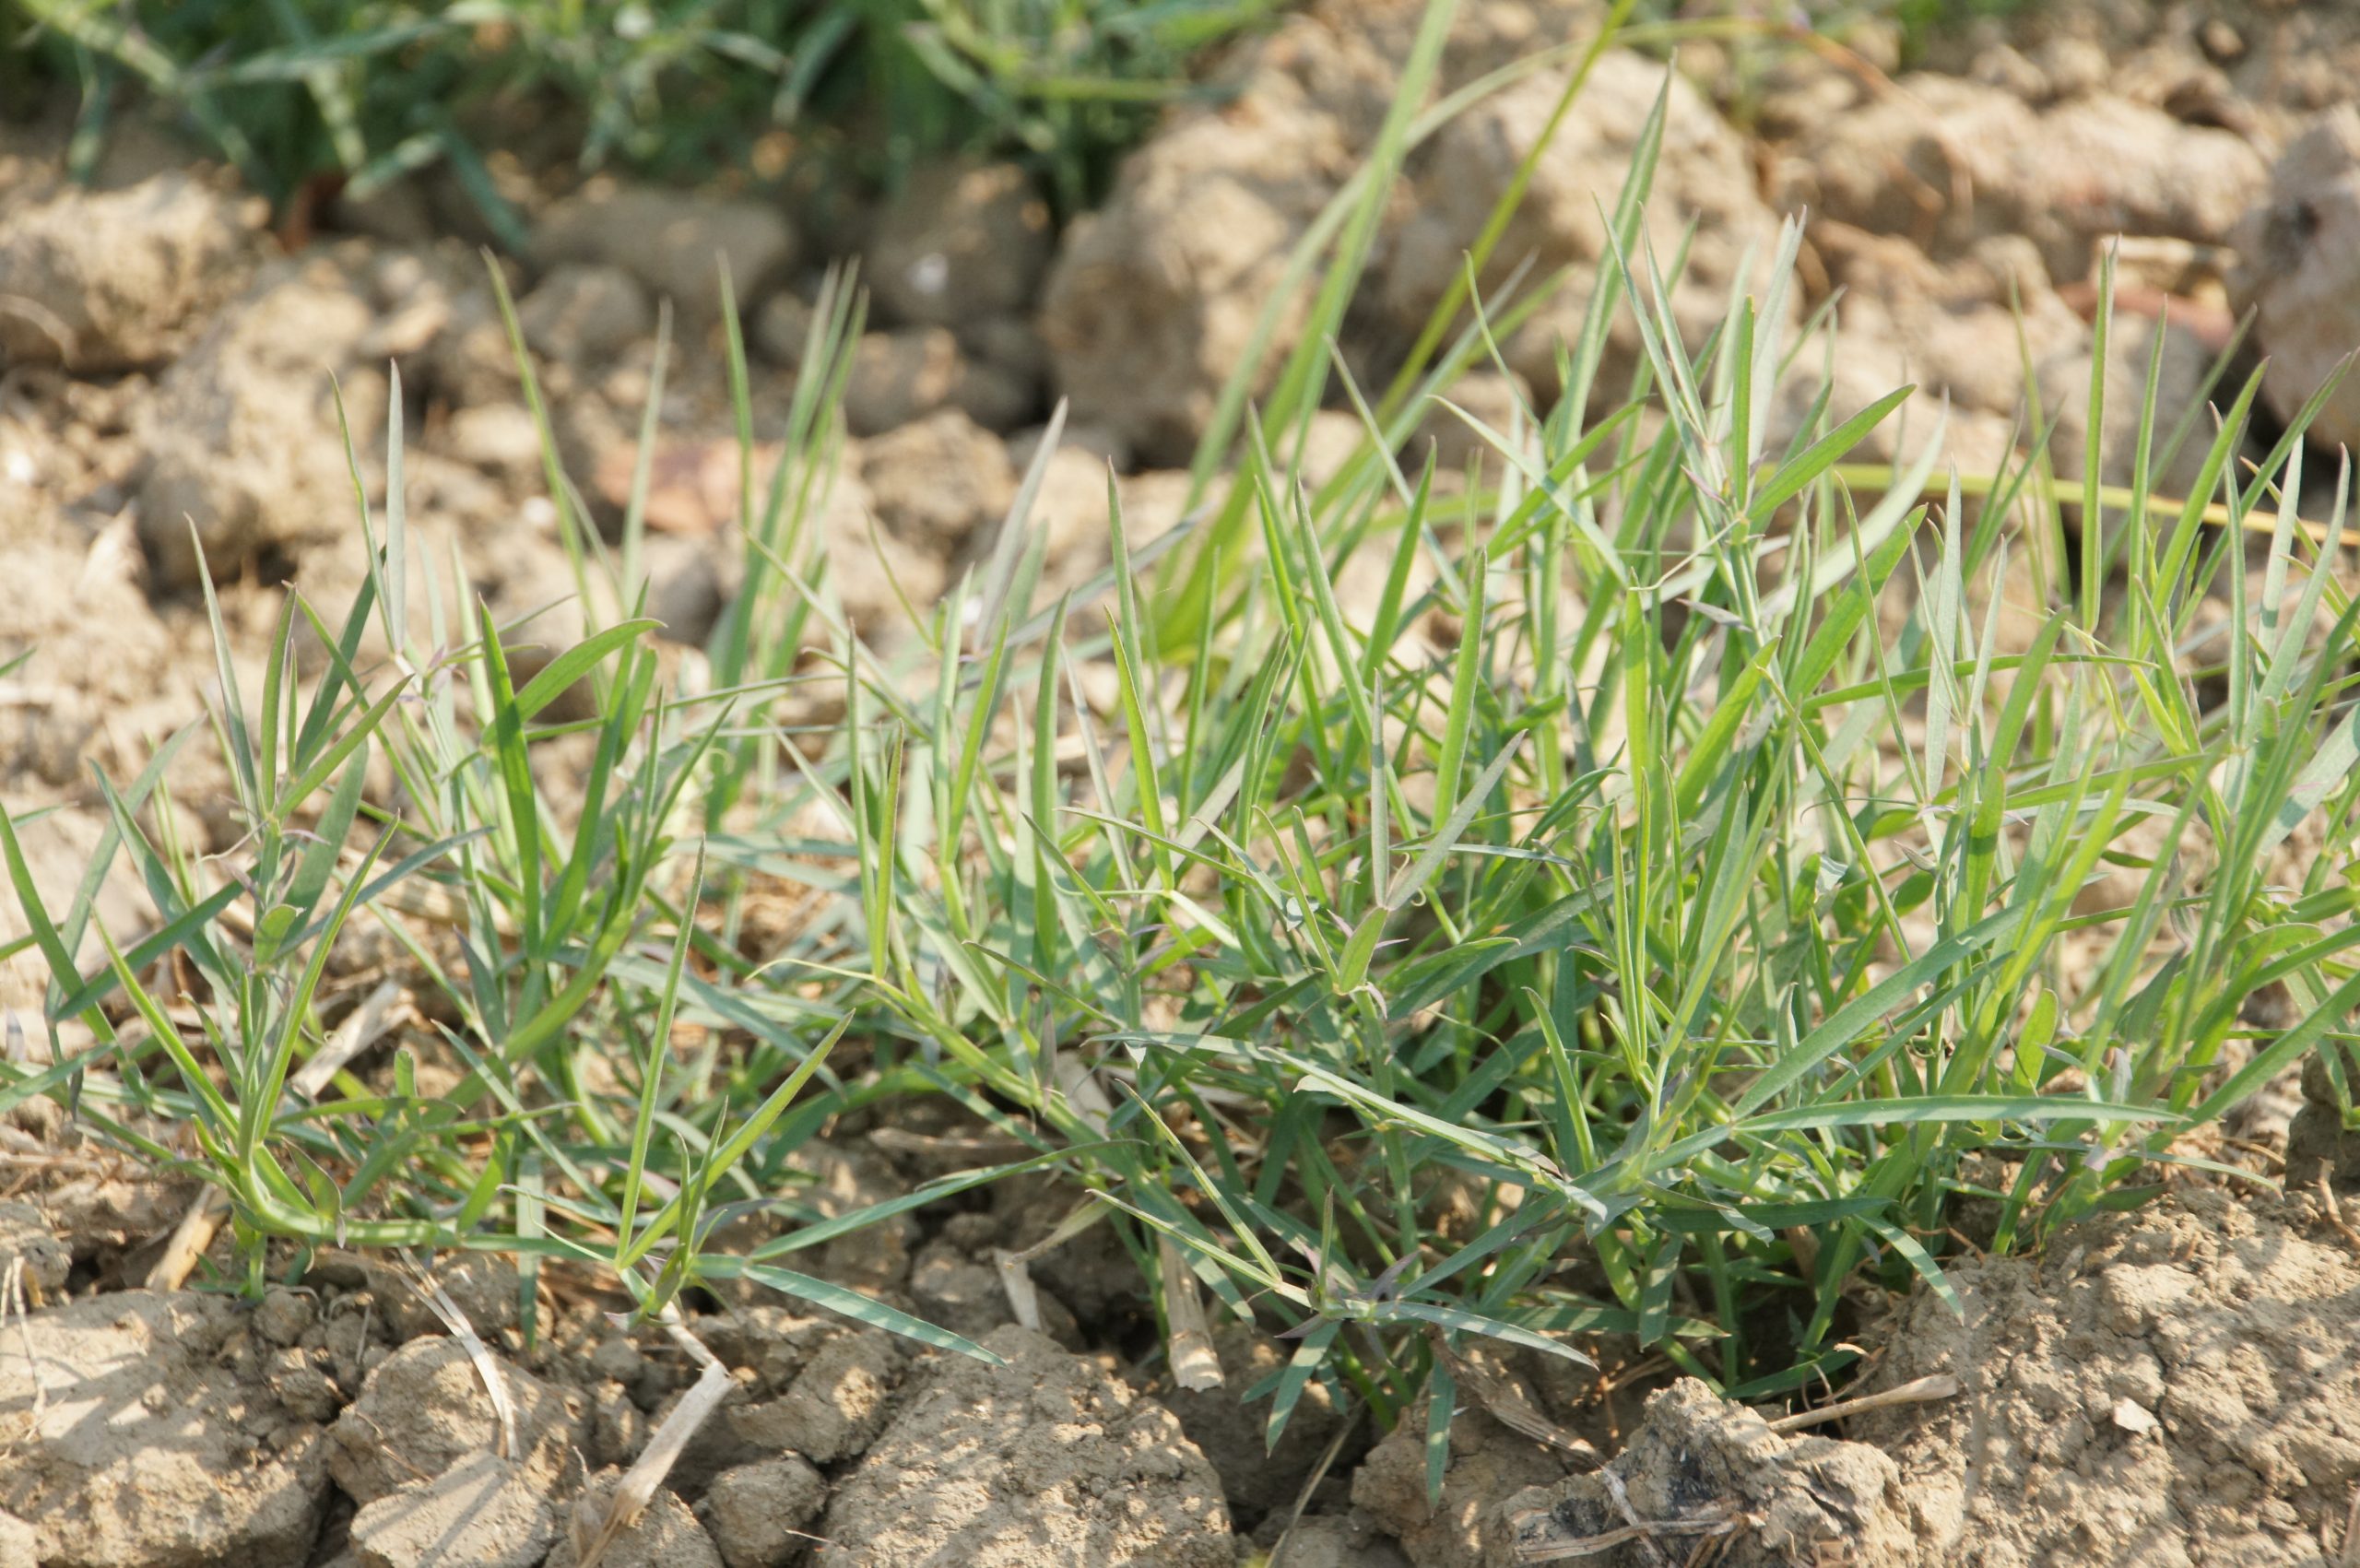 An example of grass pea growing in dry soil